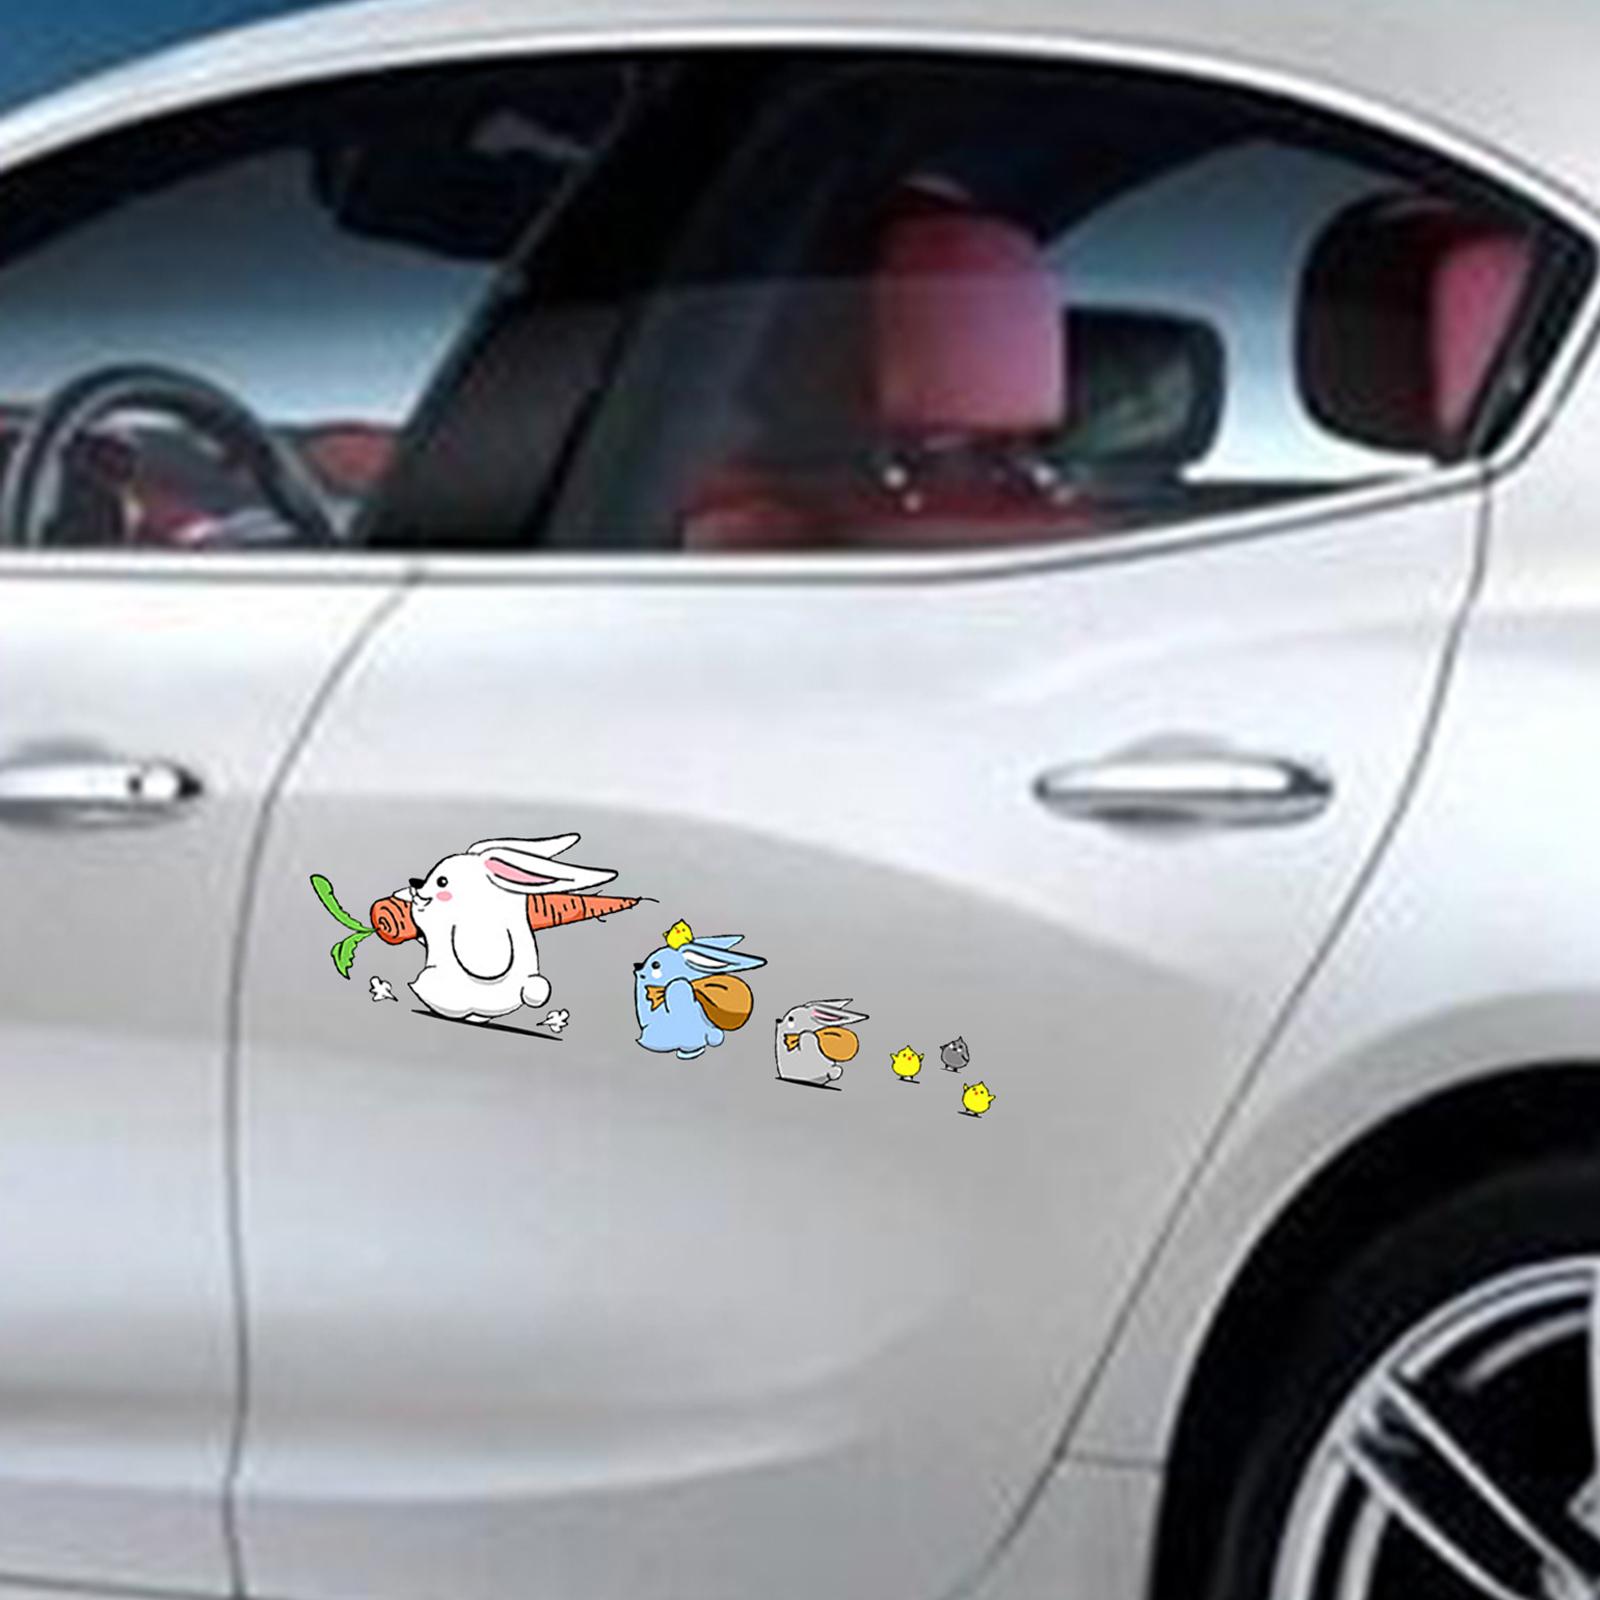 Bunny Car Stickers Car Window Decals Graphic for Cars Windows Vehicles Left S 